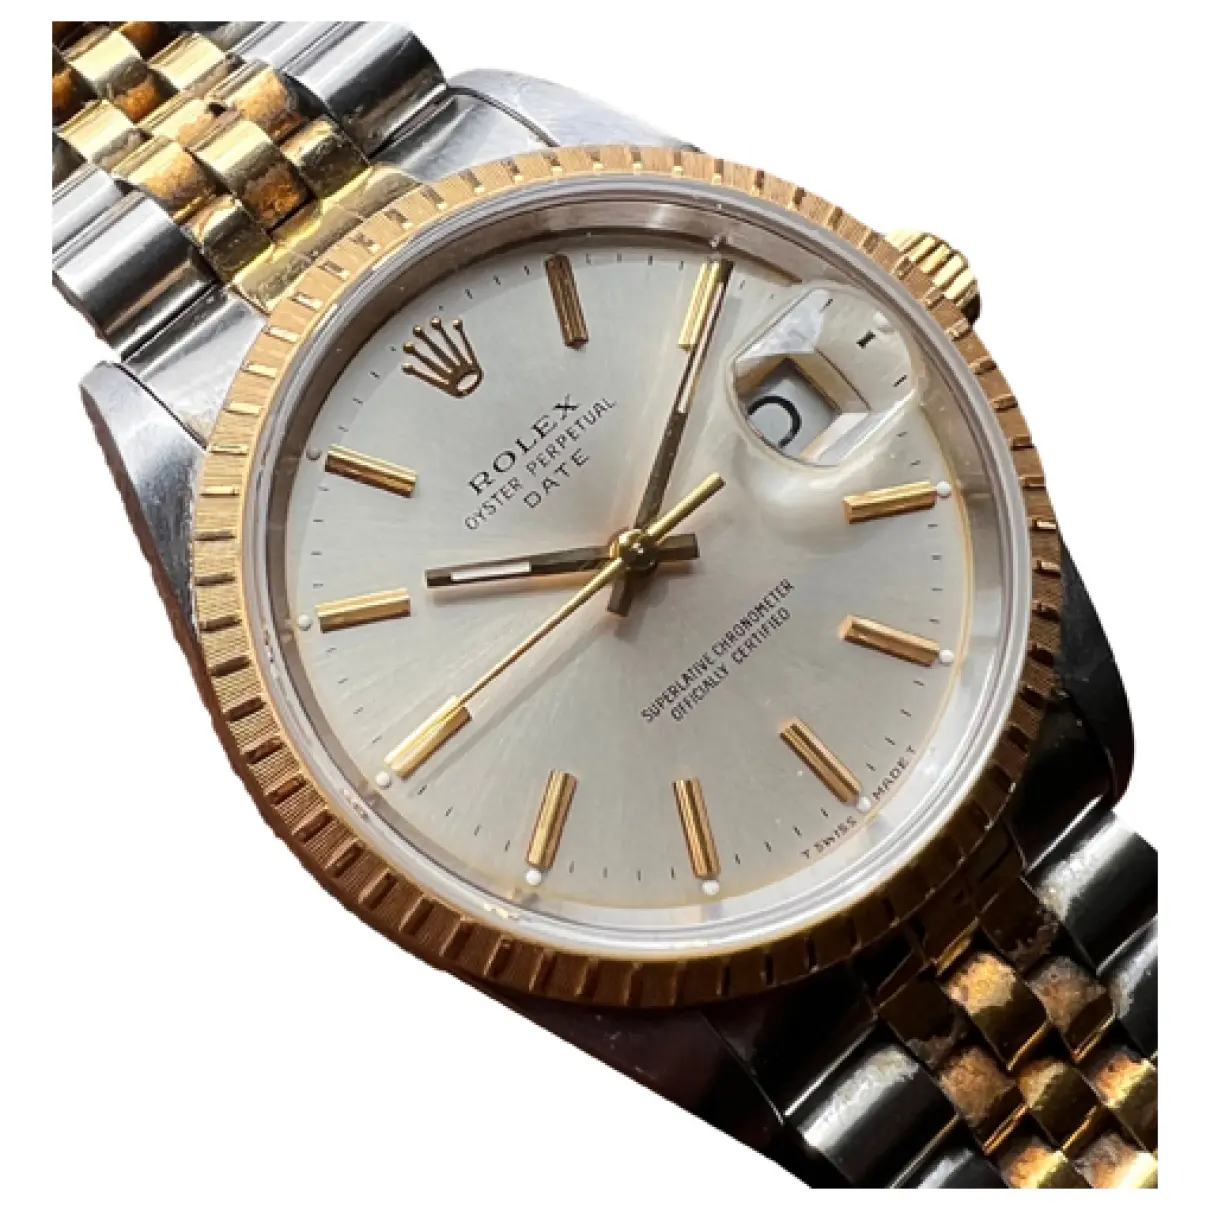 Oyster Perpetual 36mm yellow gold watch Rolex